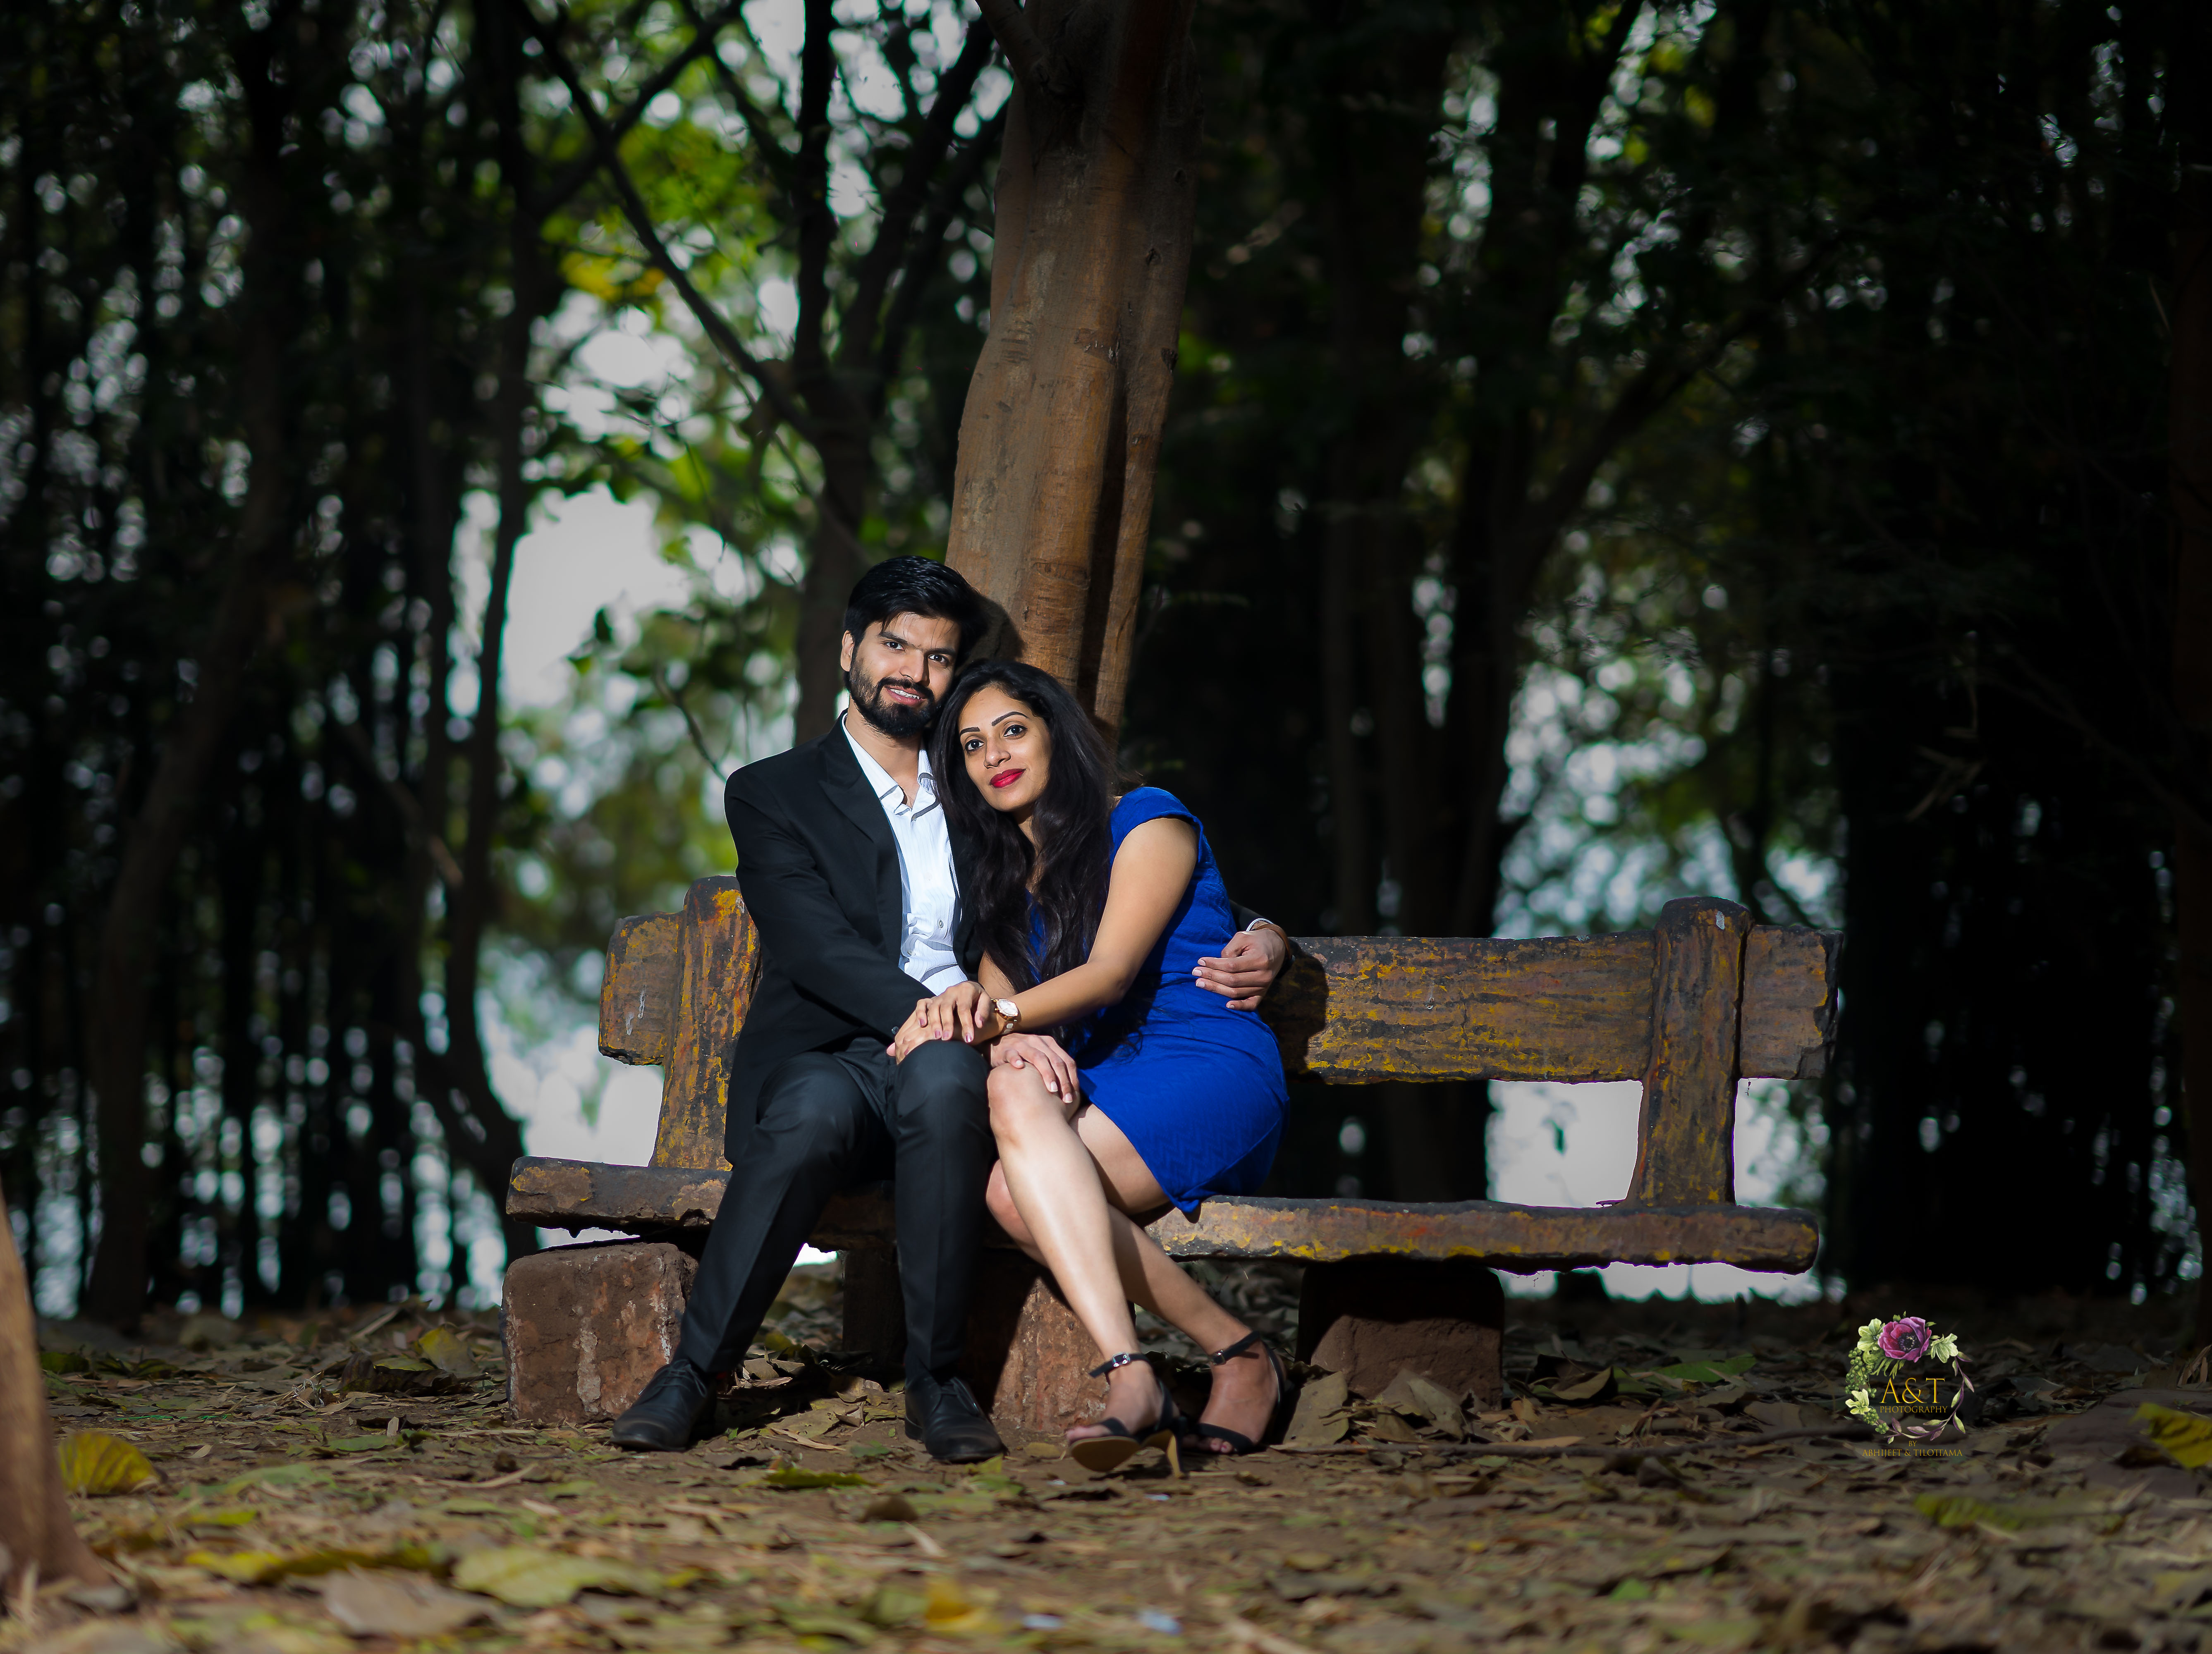 Heena & Vikas Seating on a Bench at Pashan Lake for their Pre wedding photoshoot in Pune